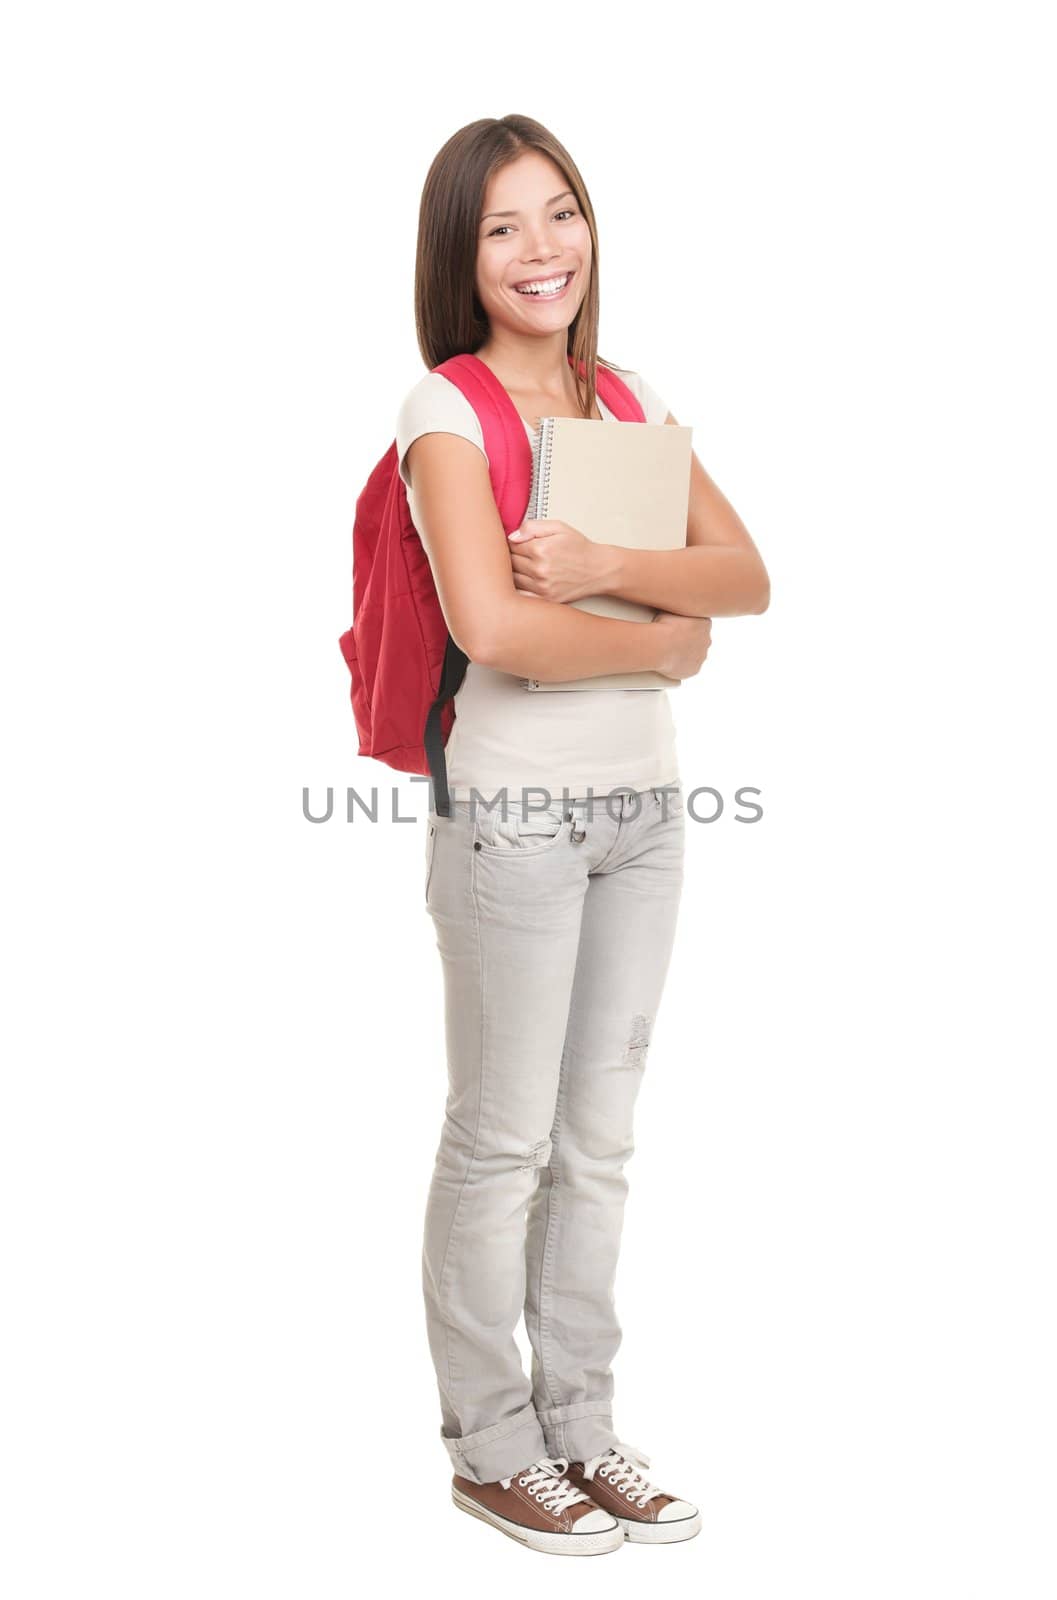 Female college university student standing isolated on white background in full length